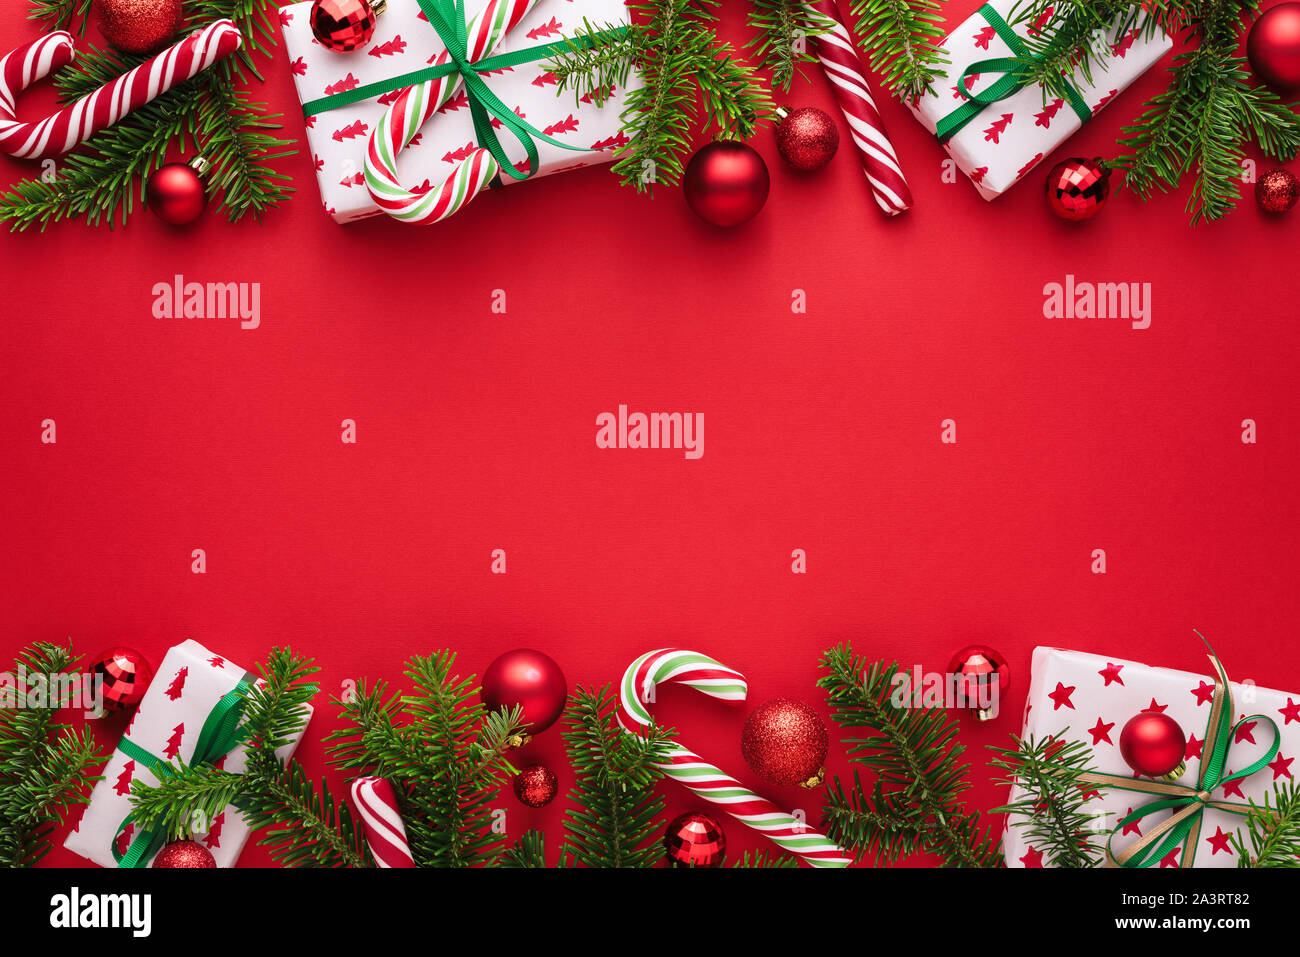 Red Christmas and New Year background. Decorative border of fir branches, gift boxes, Christmas balls and candy cane. Copy space for Christmas creep Stock Photo